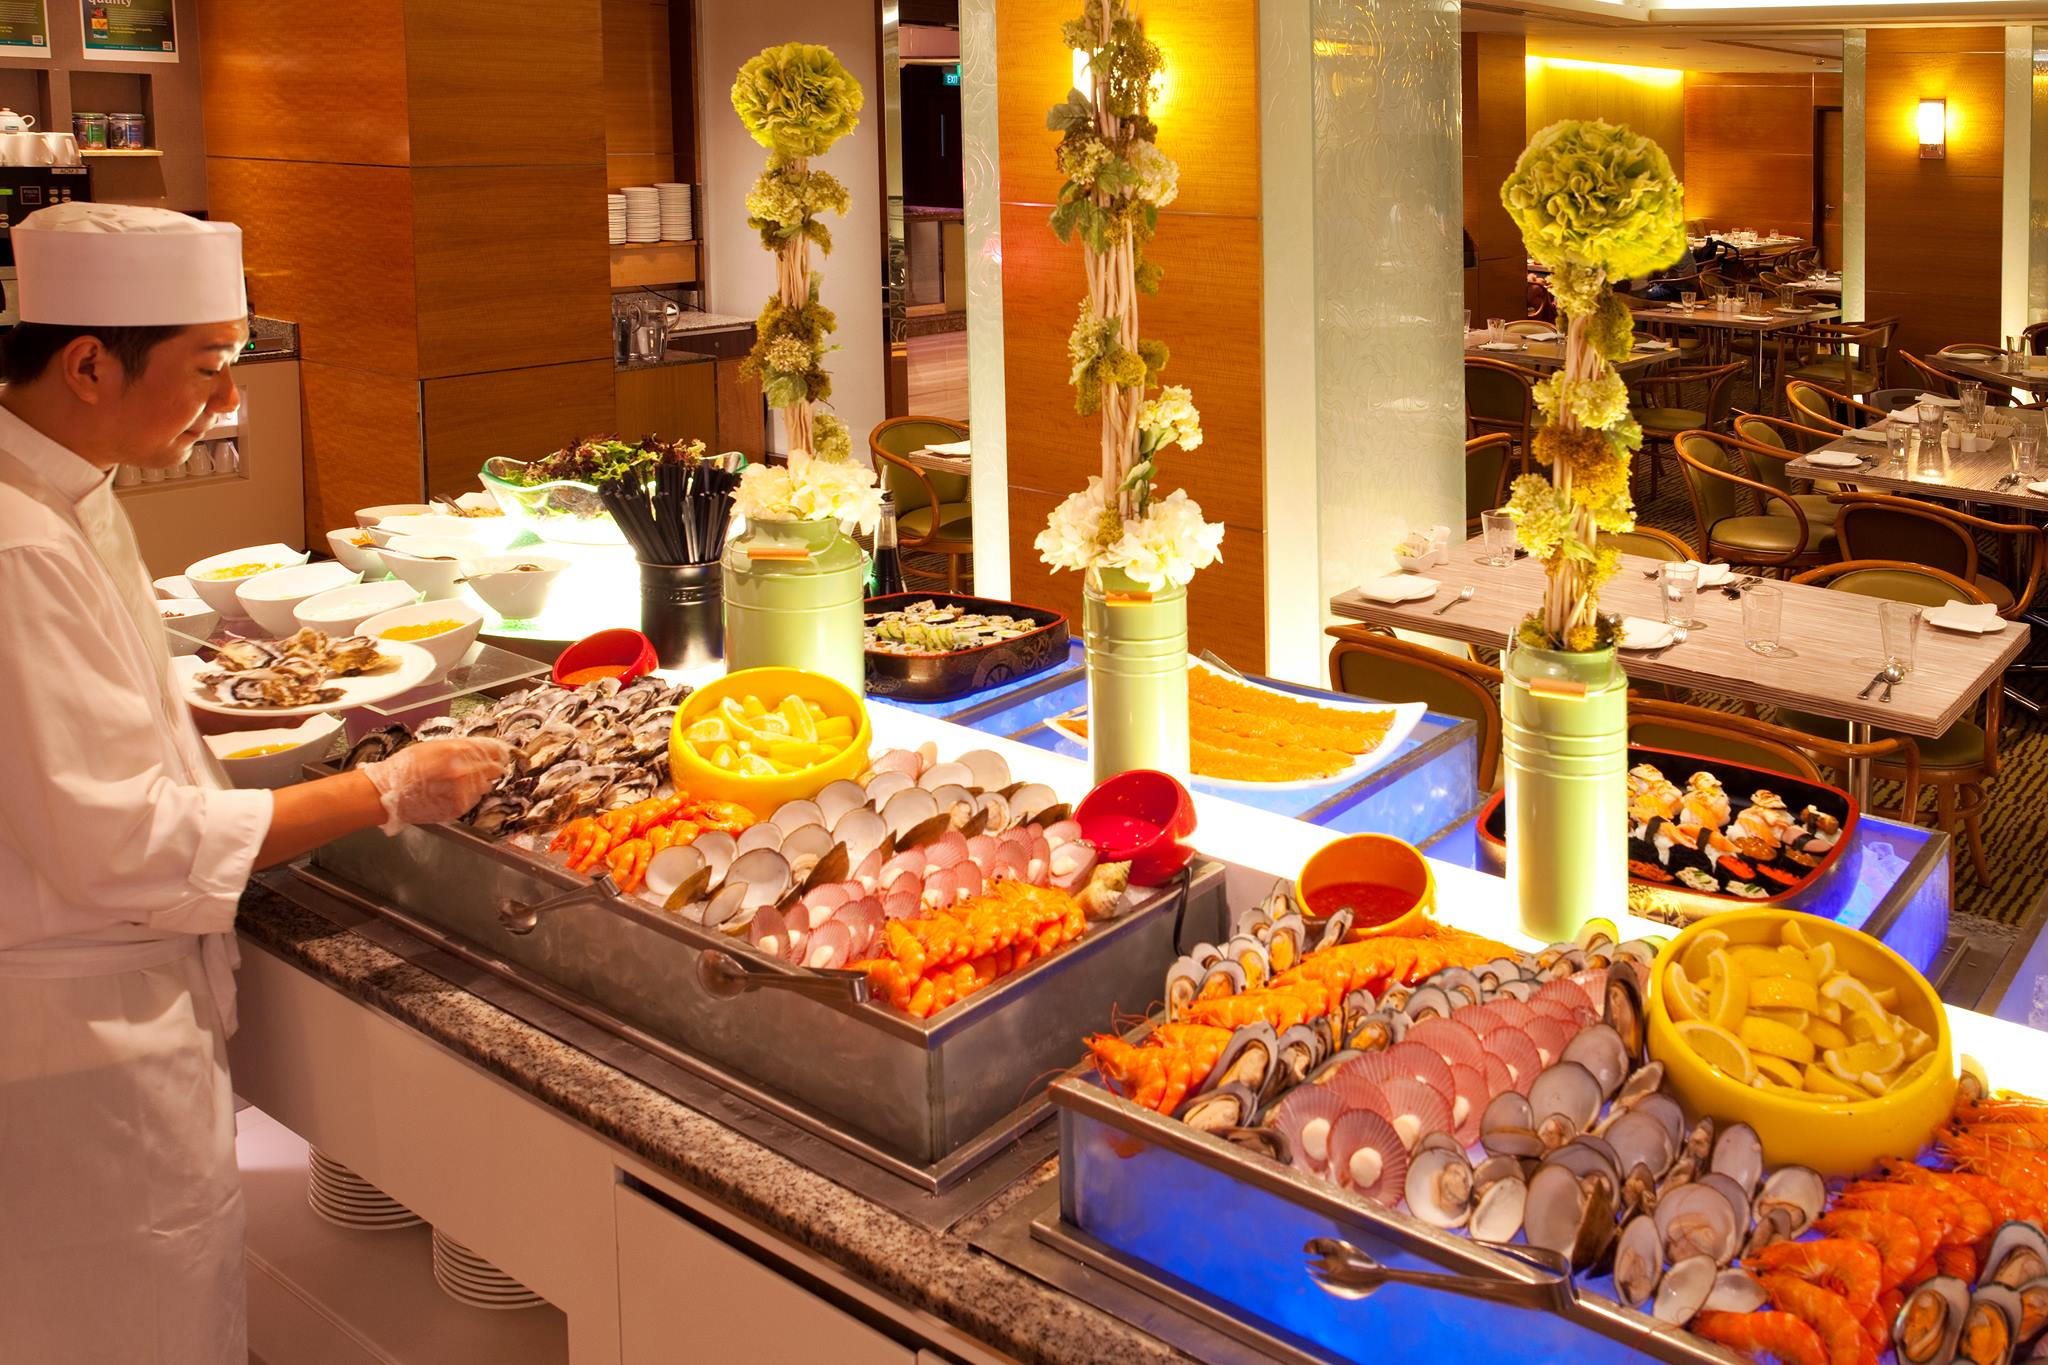 10 Atas Hotel Seafood Buffet Lobangs That Let You Feast At Up To 50%